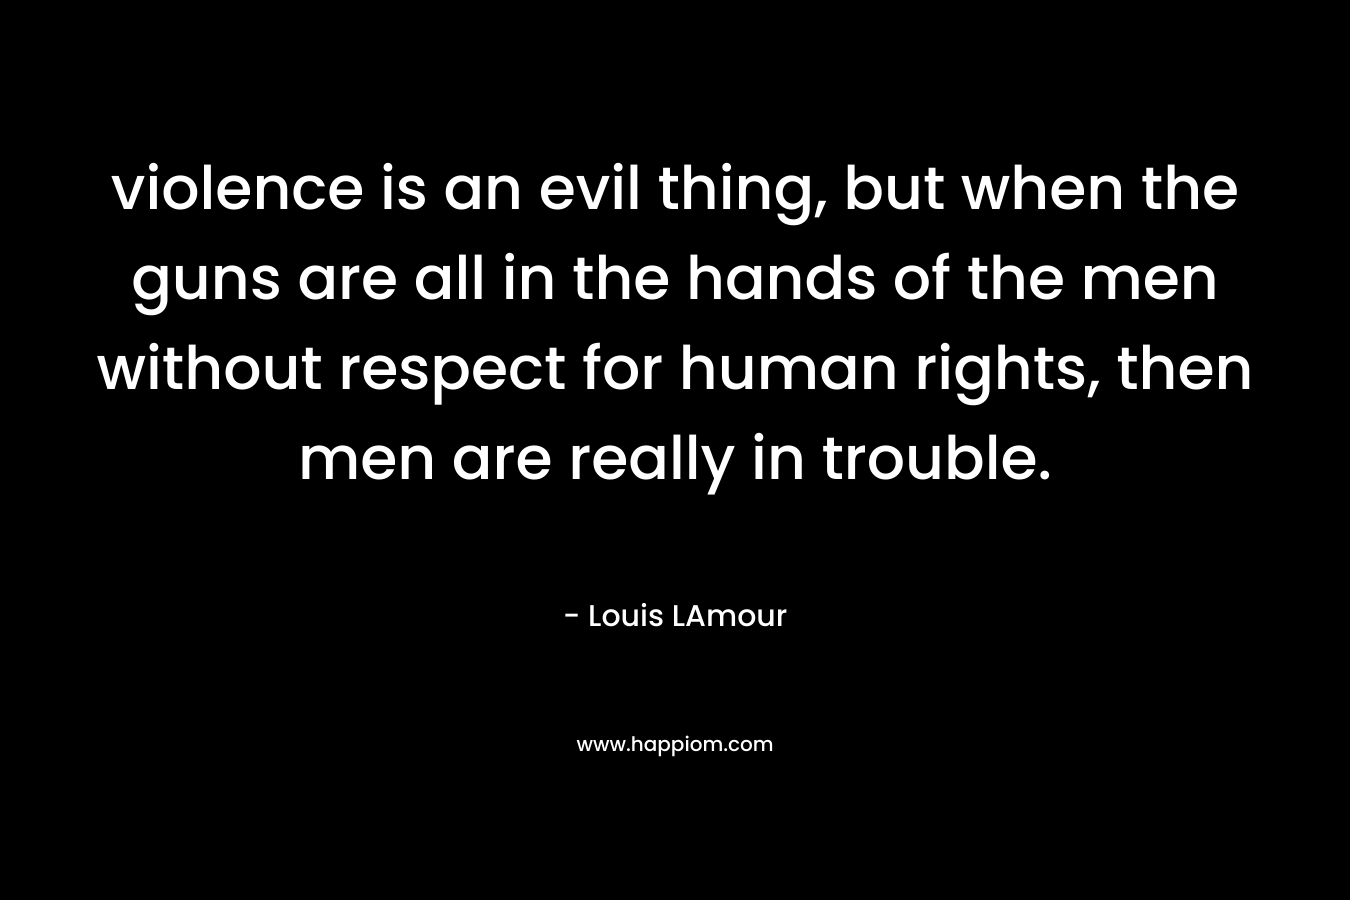 violence is an evil thing, but when the guns are all in the hands of the men without respect for human rights, then men are really in trouble. – Louis LAmour